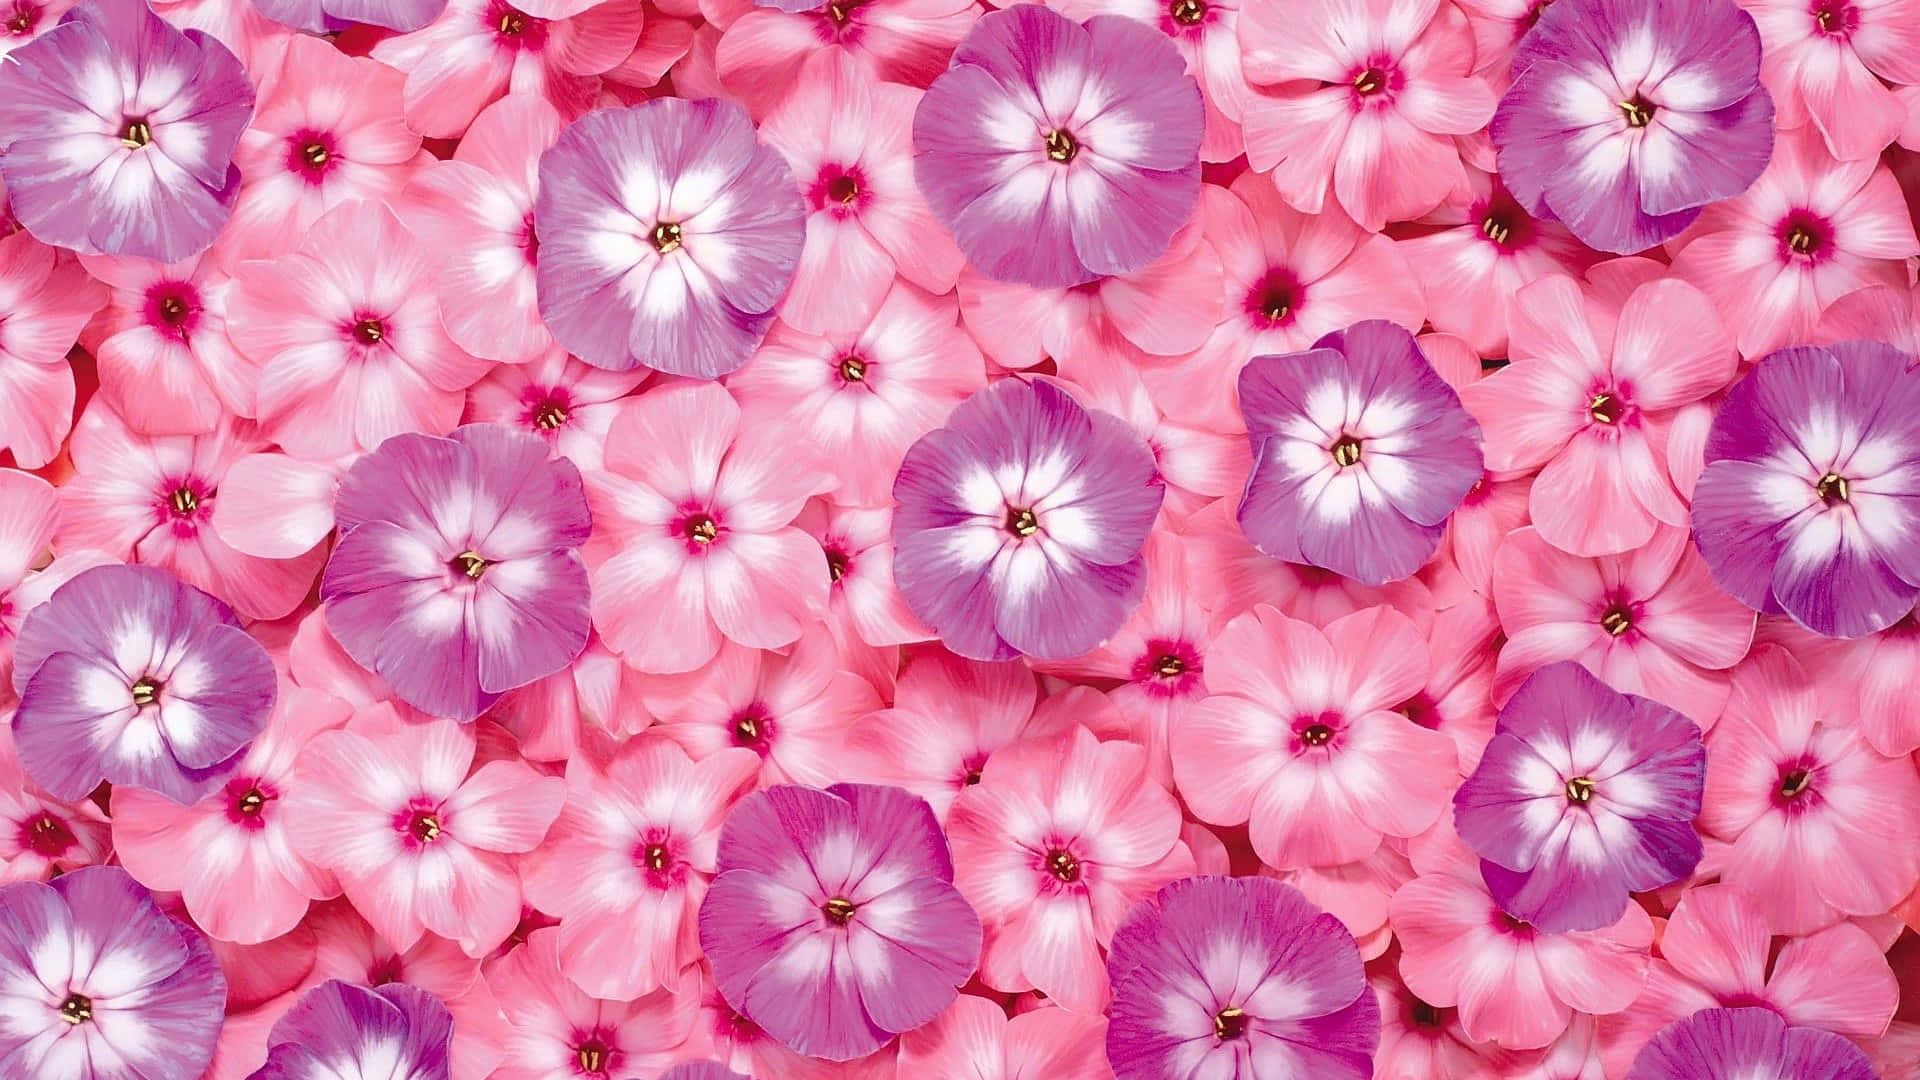 A close-up of a beautiful pink flower in full bloom.